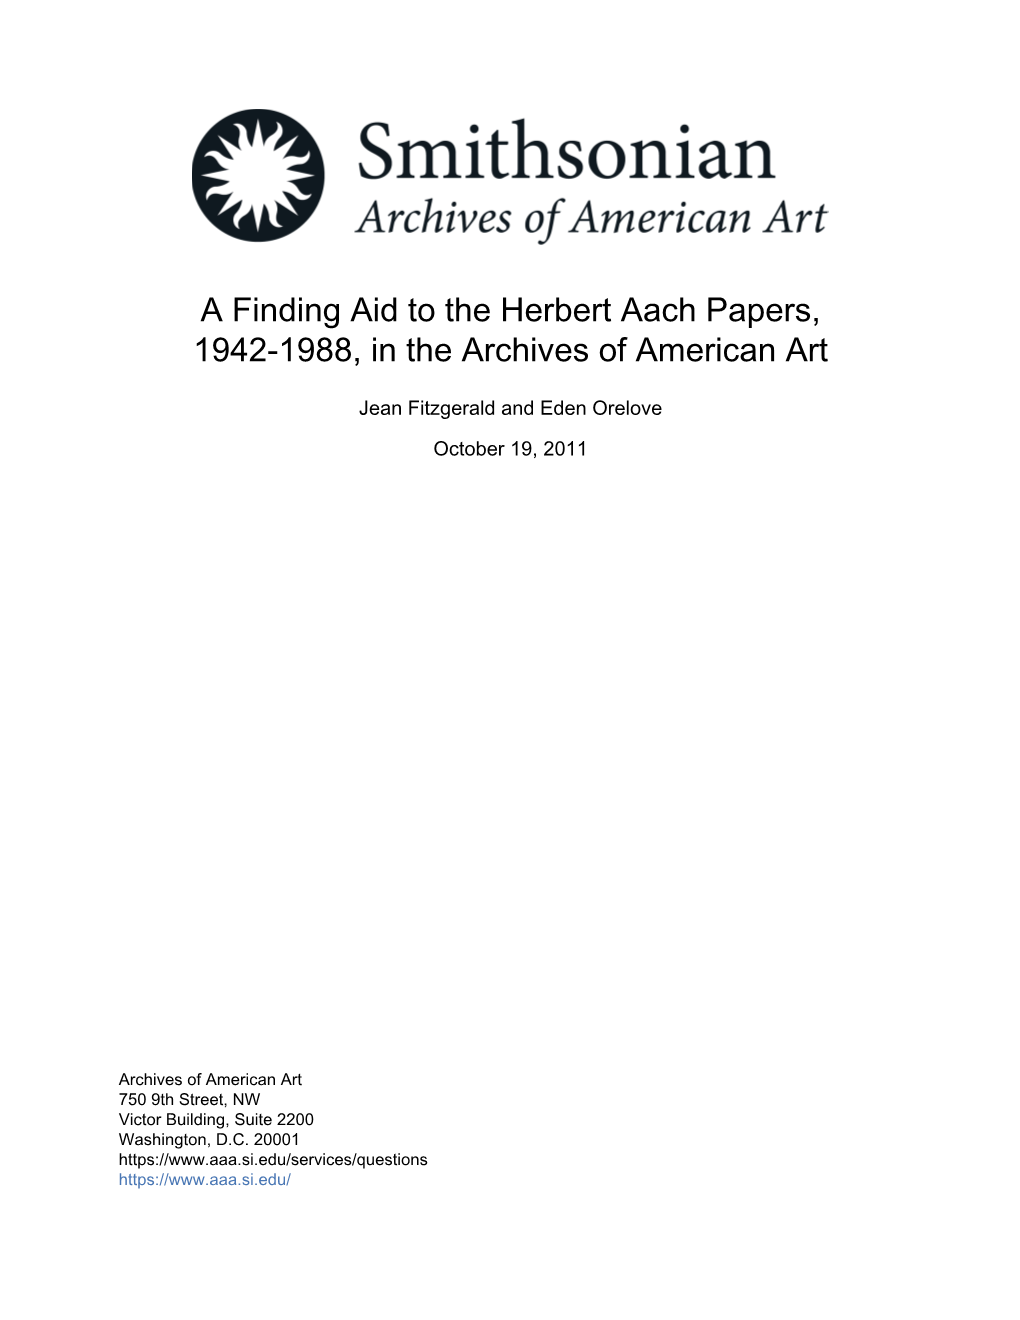 A Finding Aid to the Herbert Aach Papers, 1942-1988, in the Archives of American Art